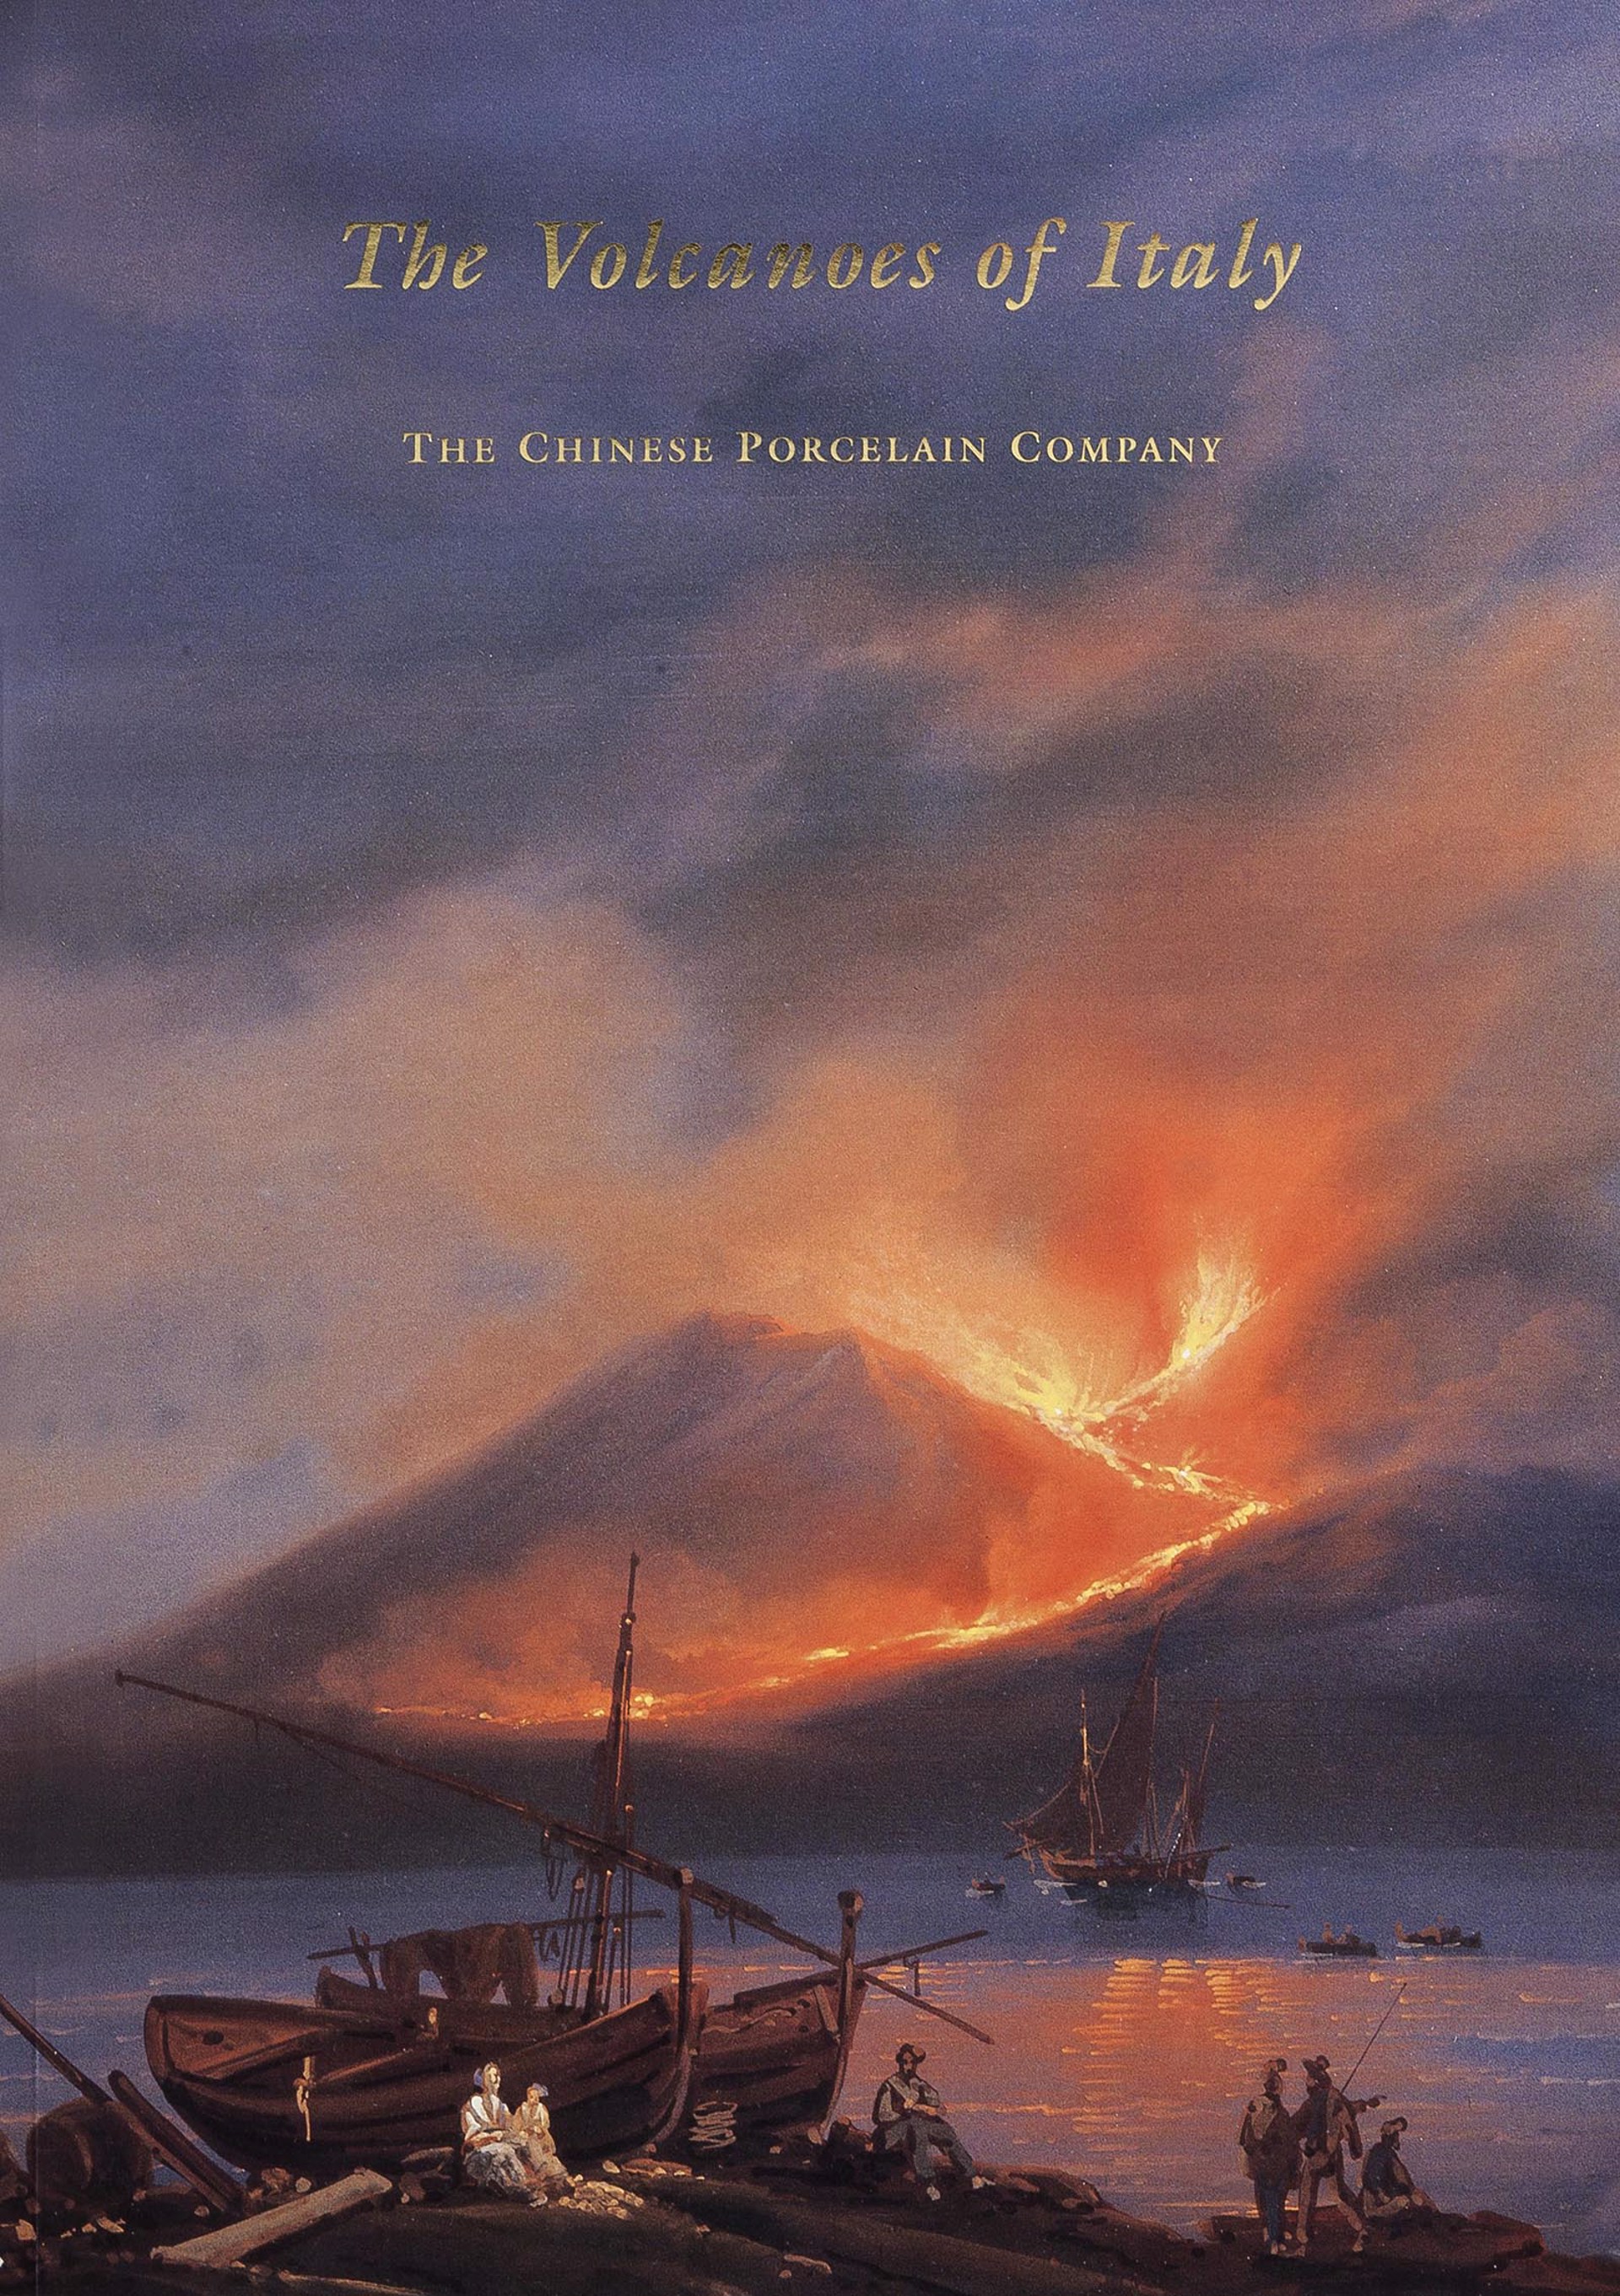 The Volcanoes of Italy by Catalog 33